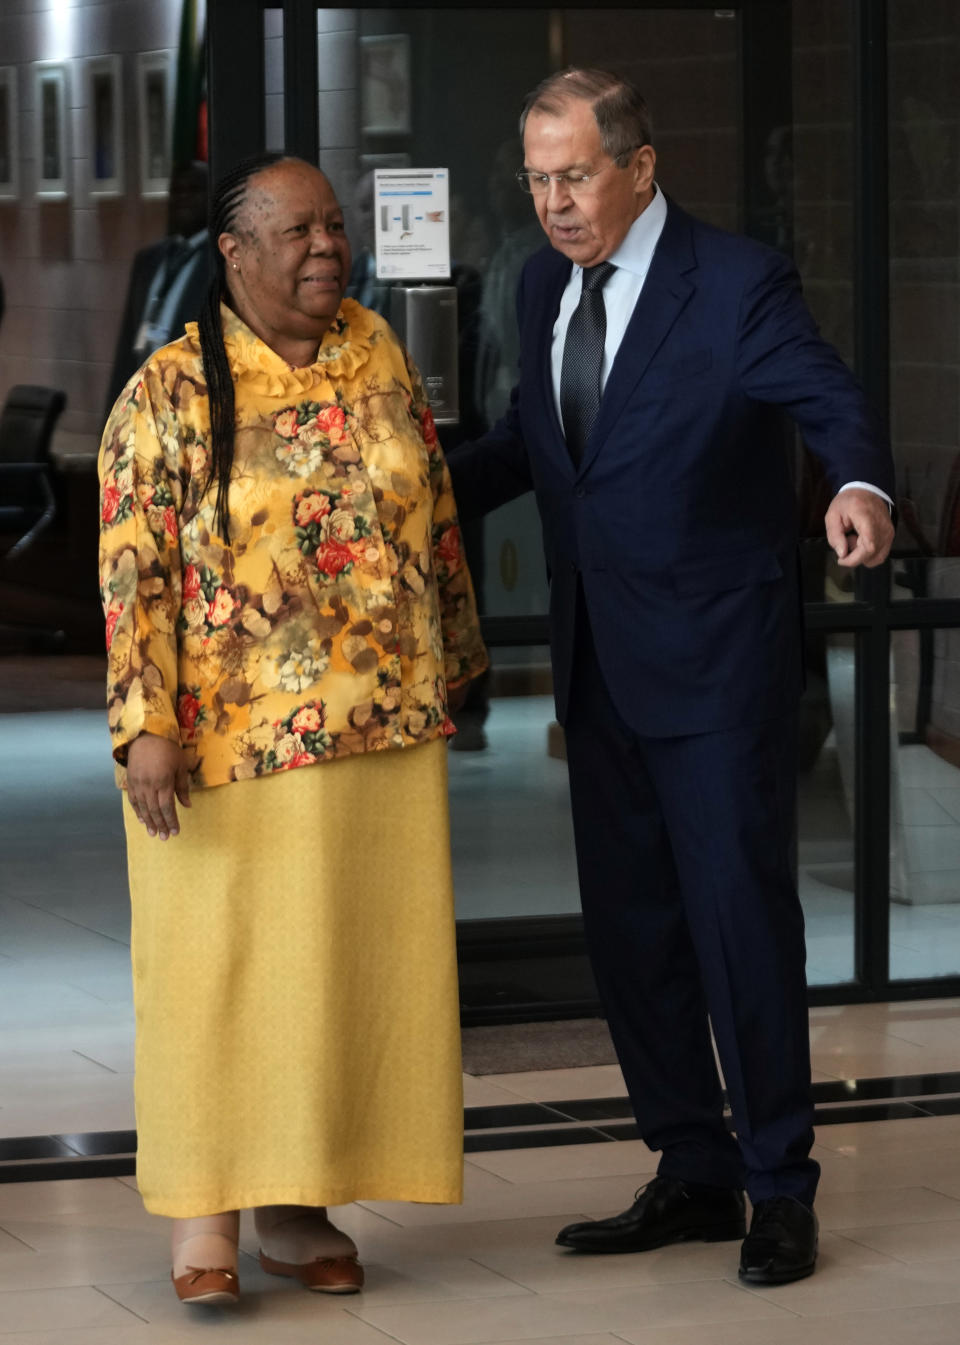 Russia's Foreign Minister Sergey Lavrov, right, is welcomed by his South Africa's counterpart Naledi Pandor in Pretoria, South Africa, Monday, Jan. 23, 2023. (AP Photo/Themba Hadebe)